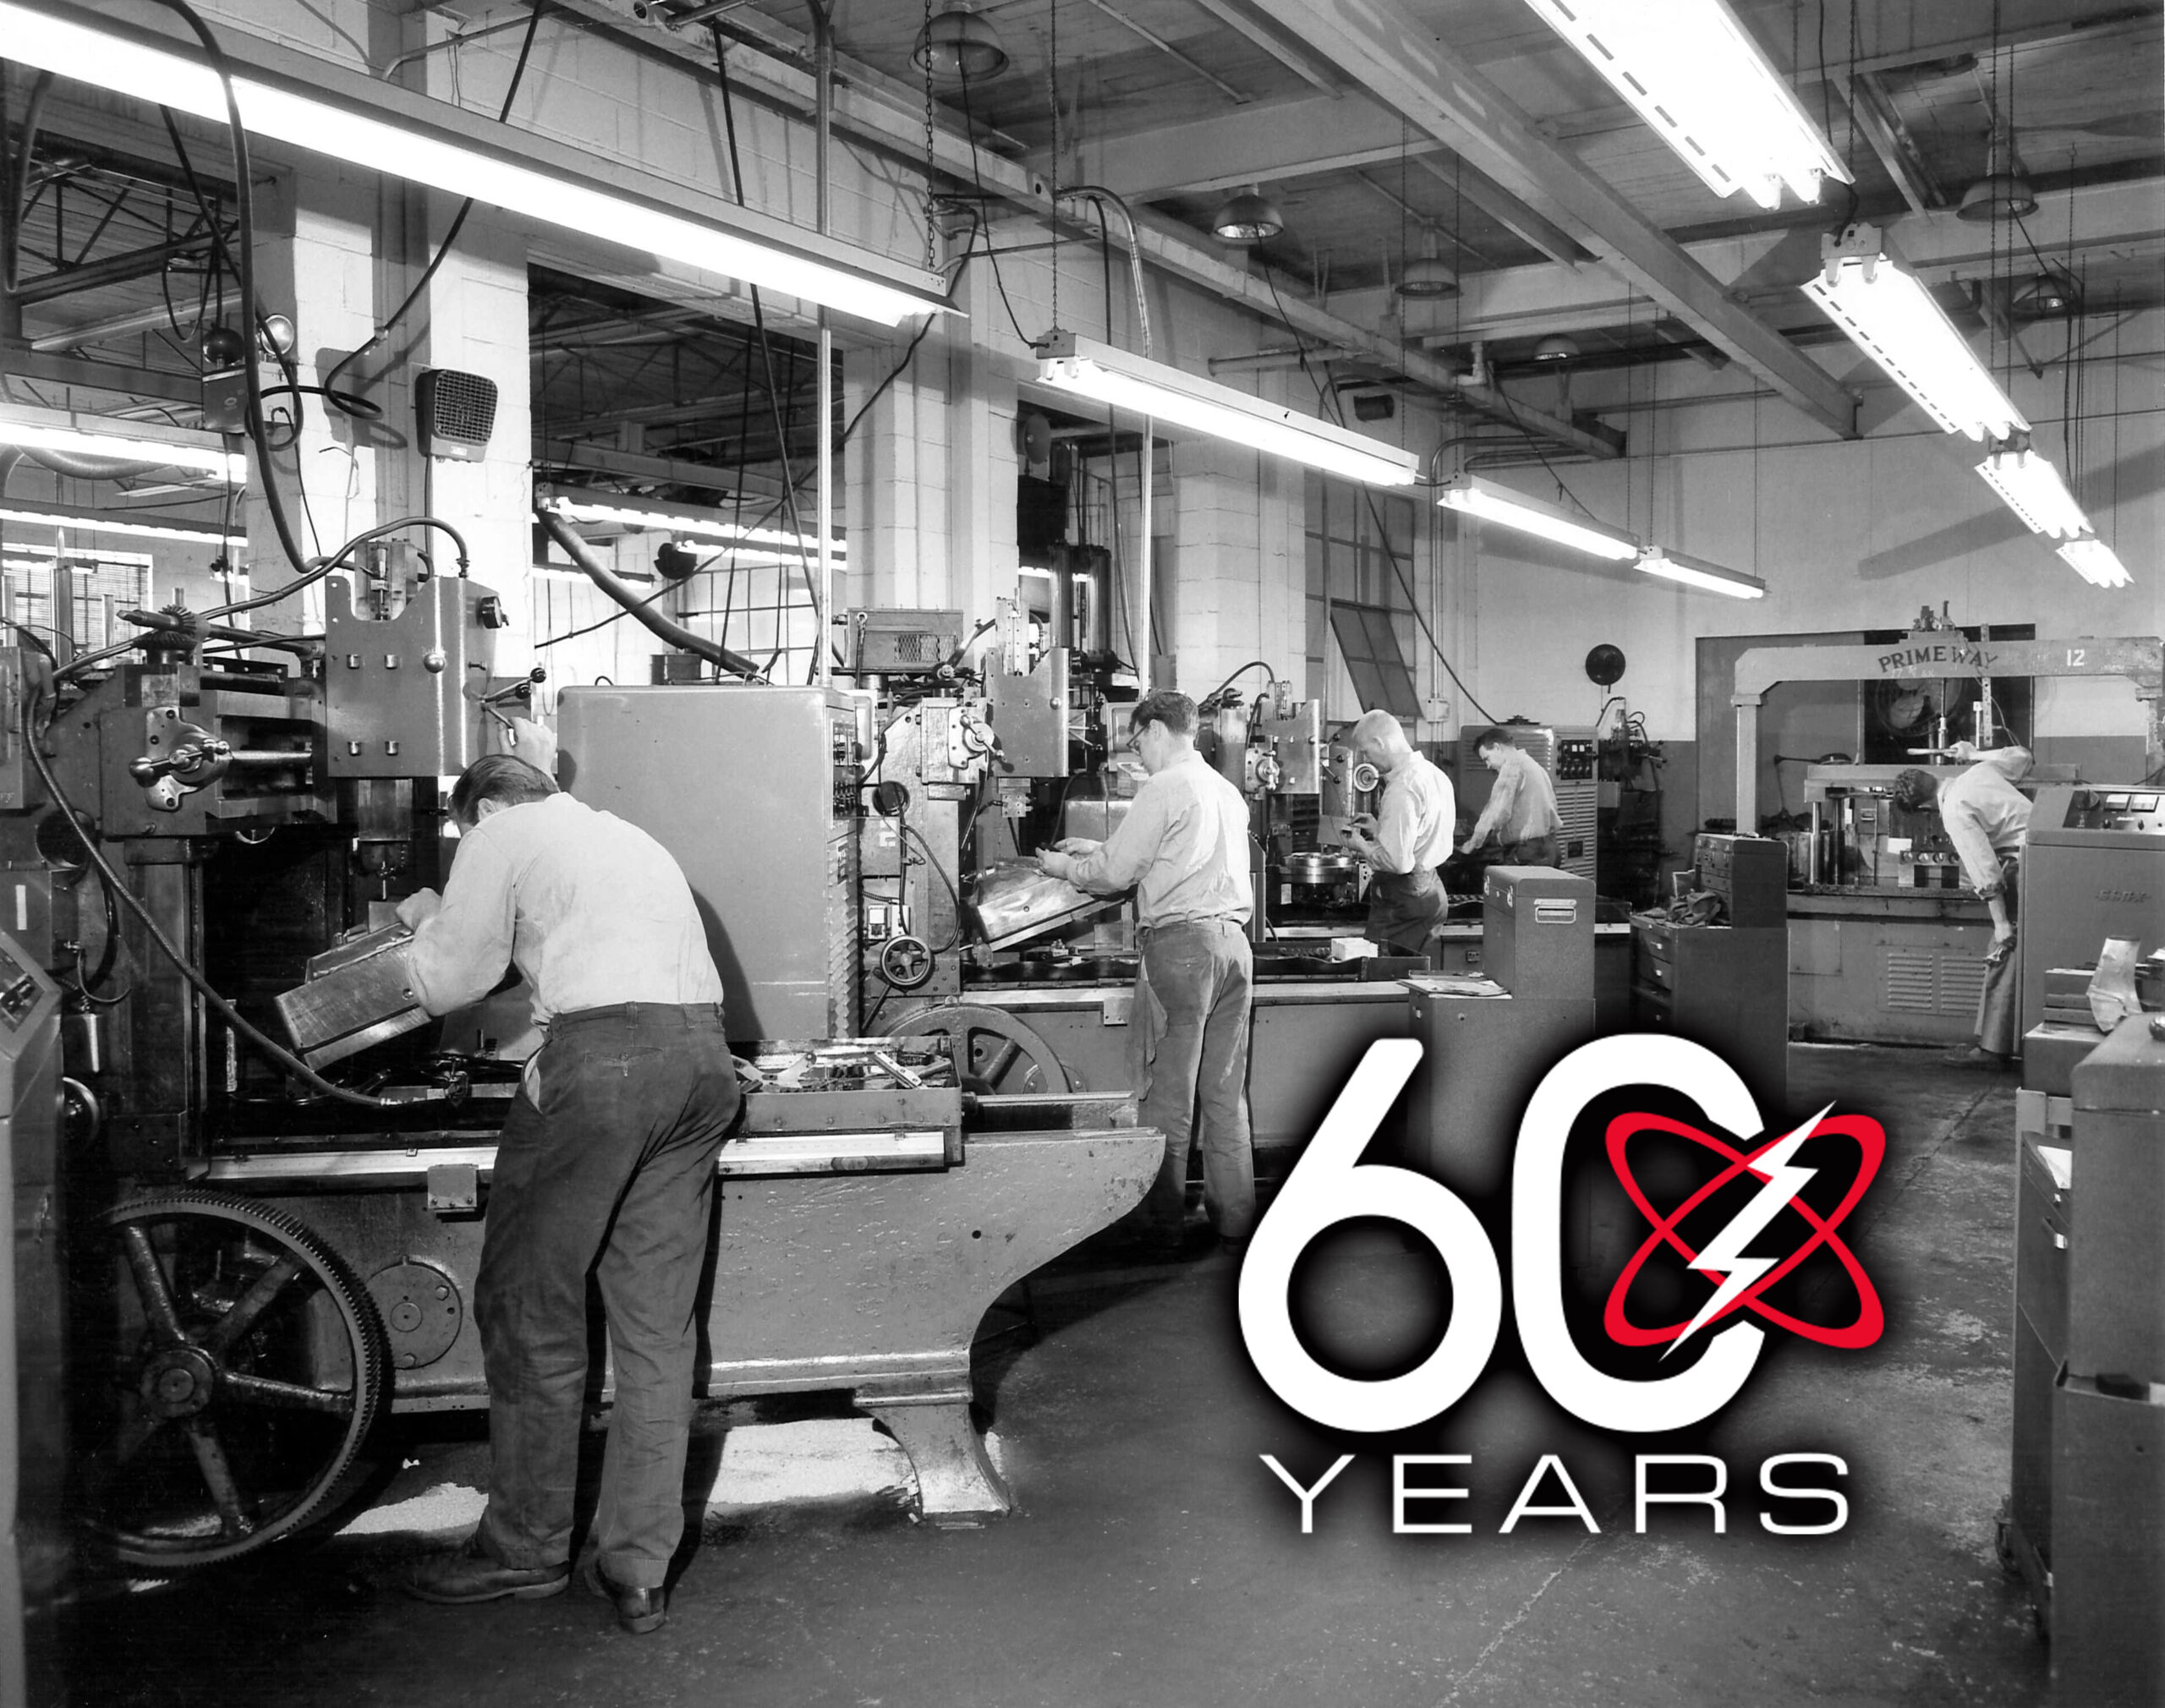 For Over 60 Years of Innovation, Quality and Service